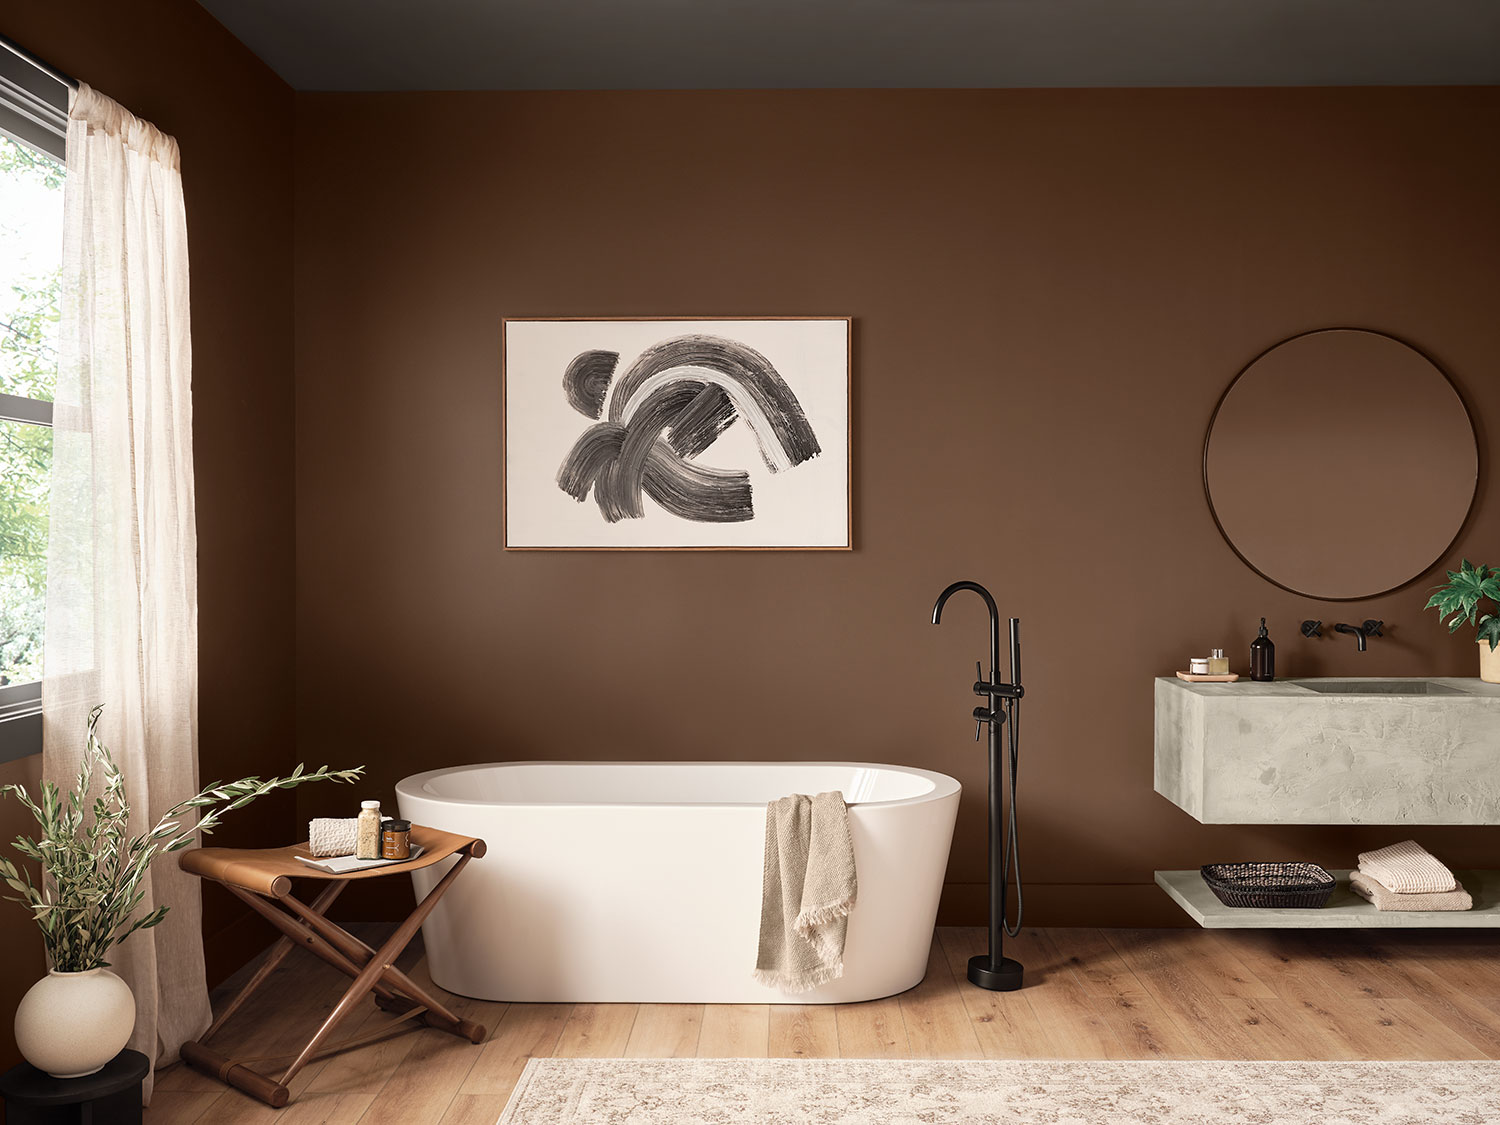 Full room image of bathroom painted Java SW 6090 with stand alone white bathtub, floating modern concrete sink, circle mirror, black and white artwork, leather folding stool holding bath products and two plants